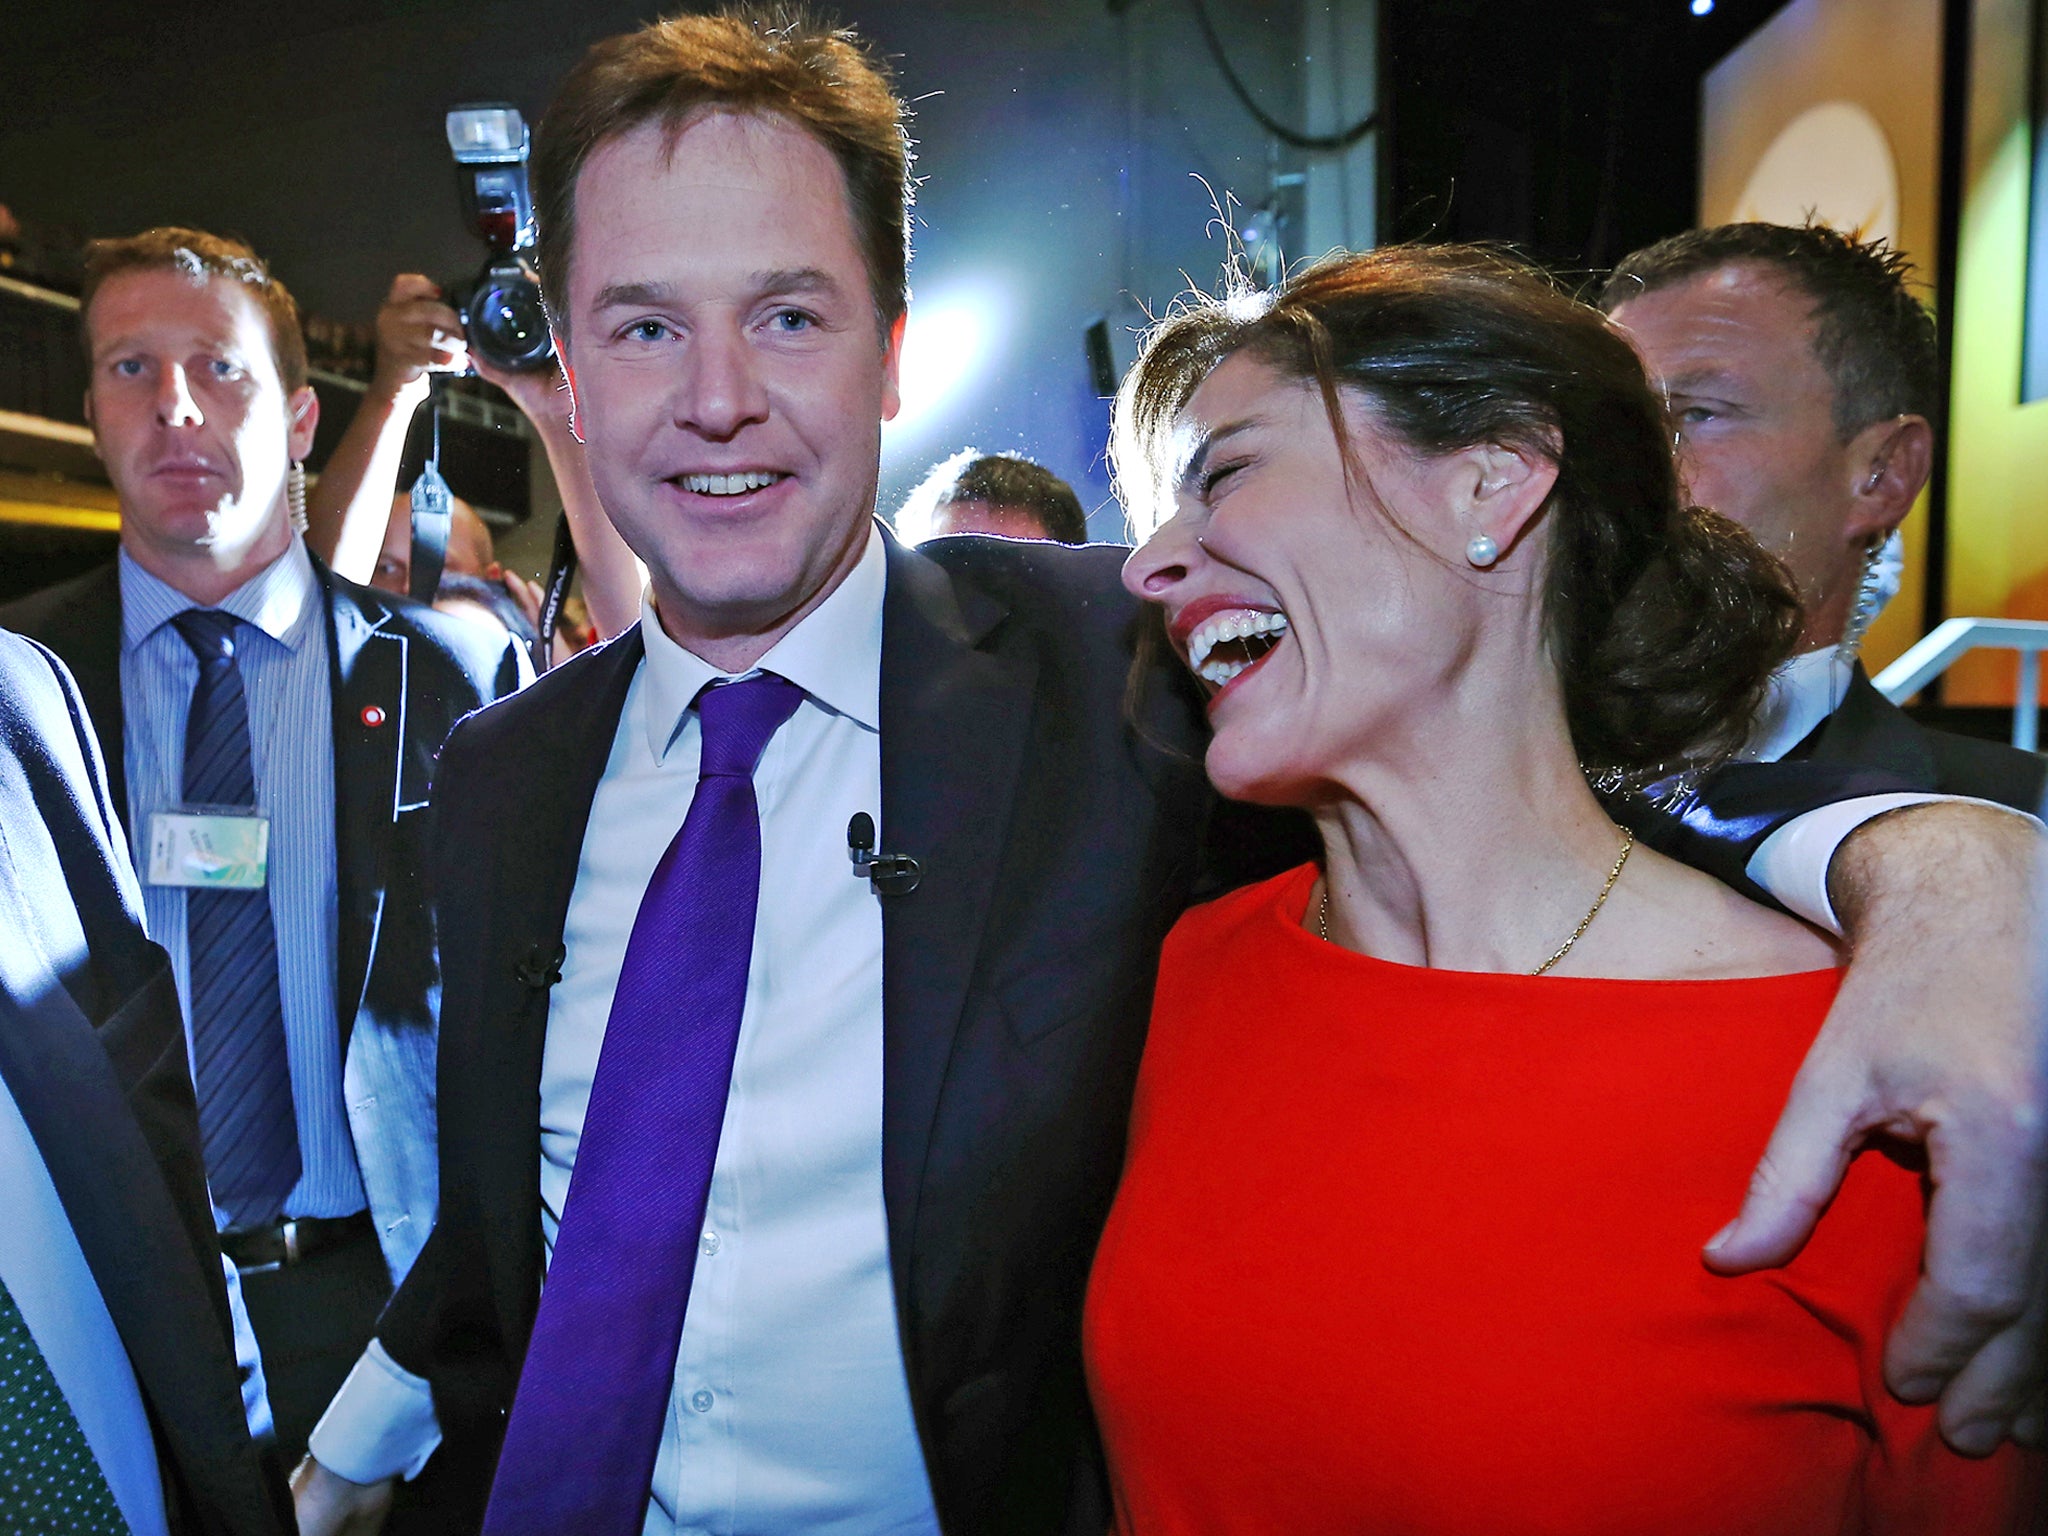 Nick Clegg leaves the Liberal Democrat conference in Glasgow with wife Miriam Gonzalez Durantez